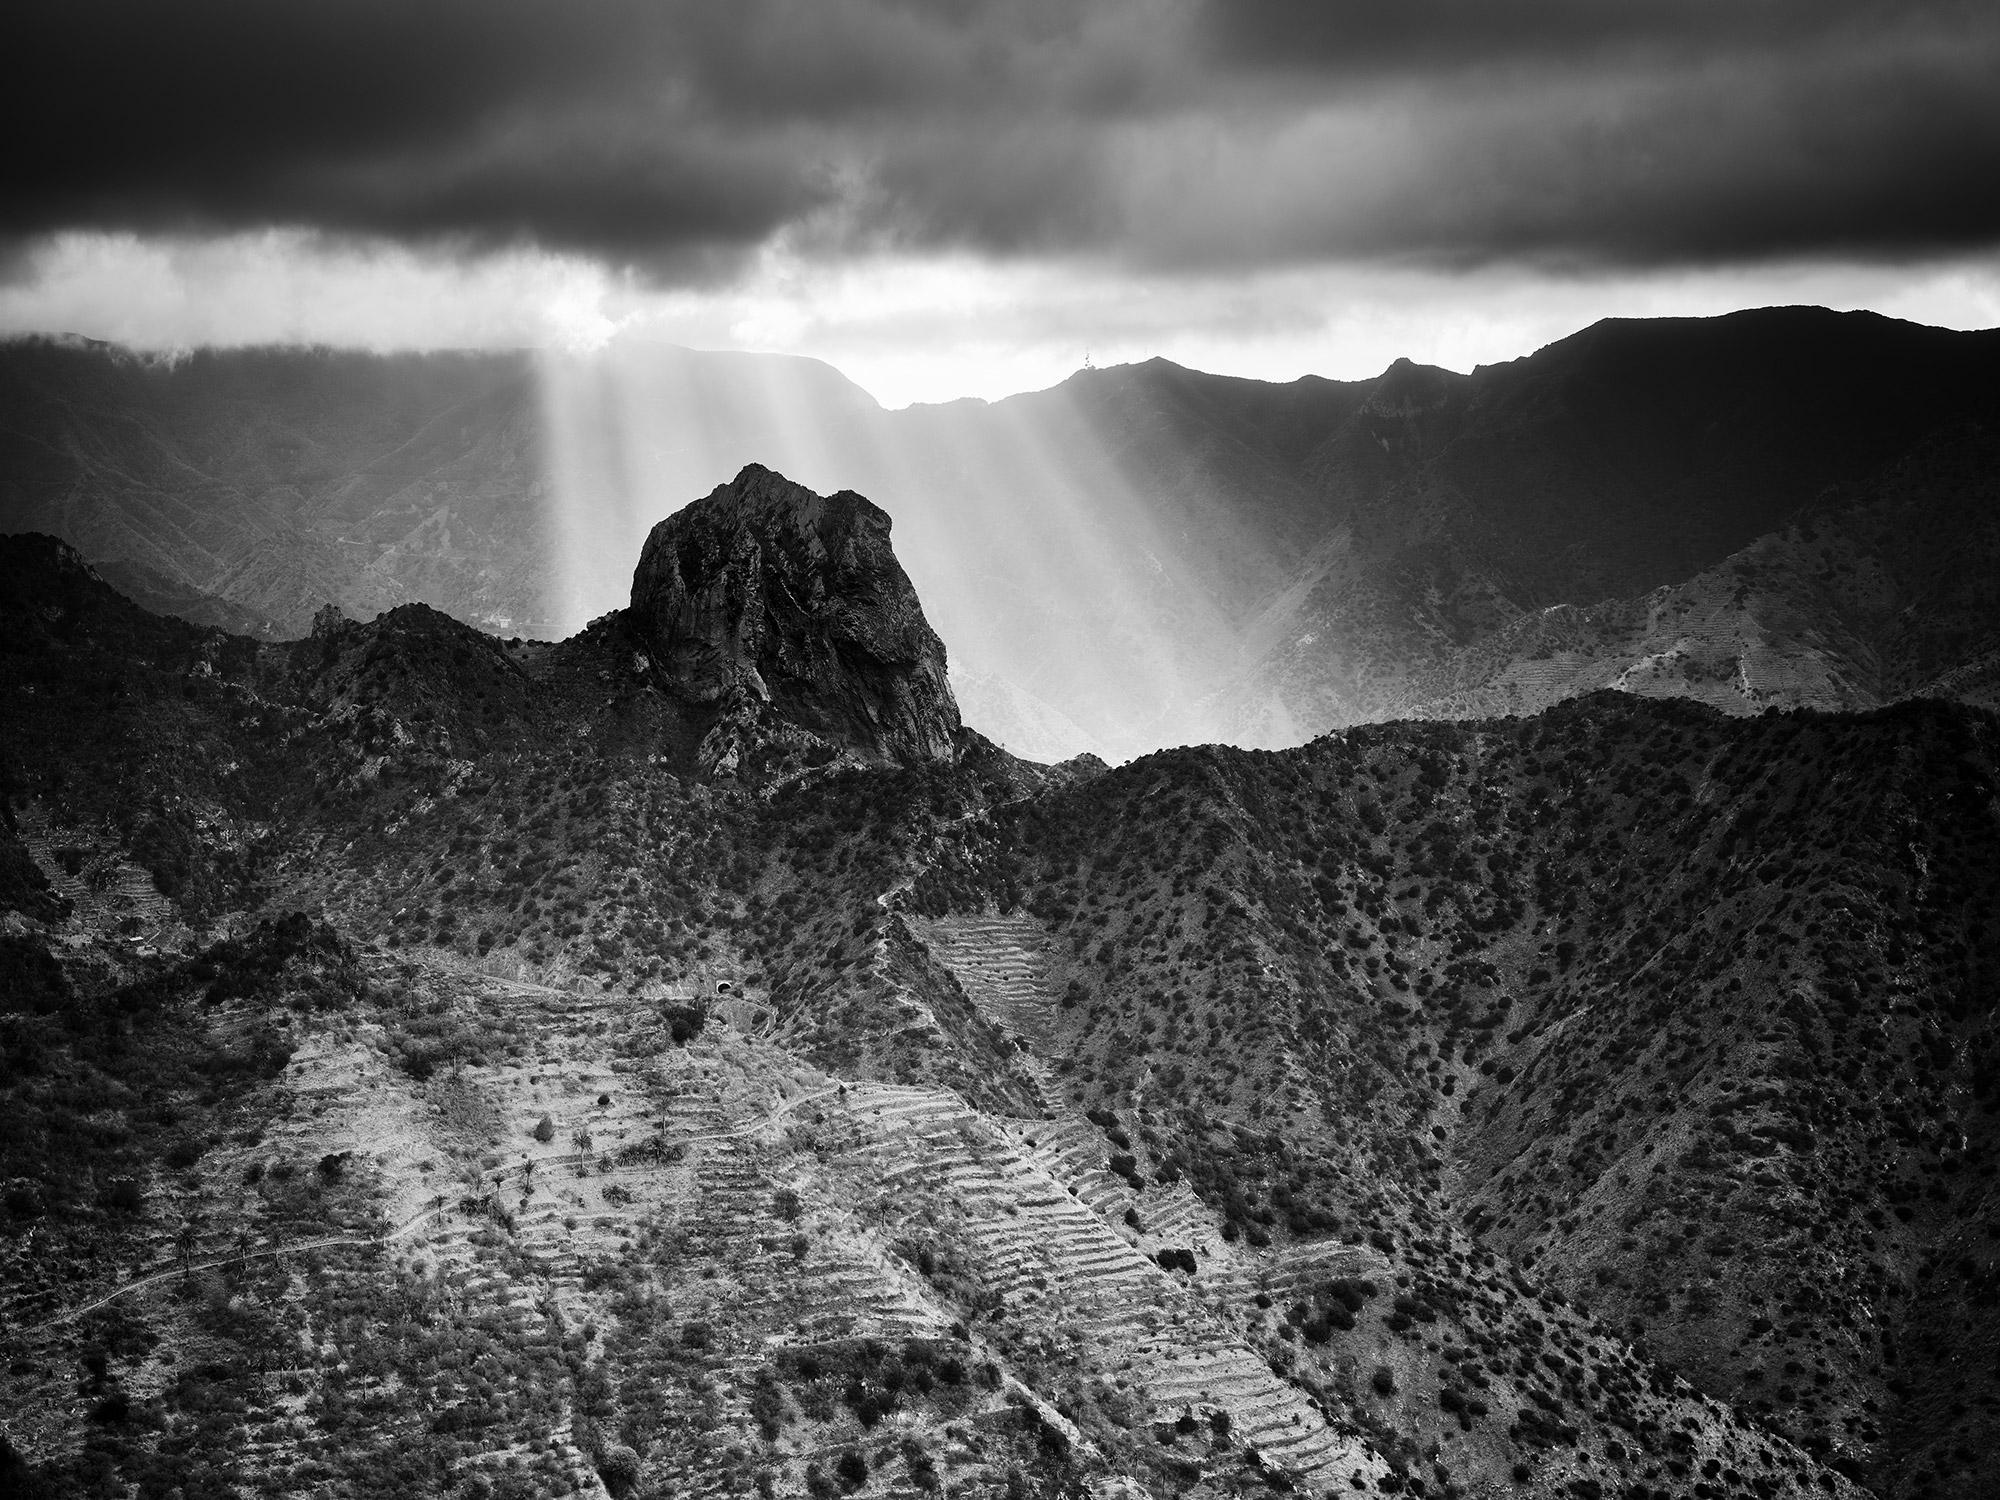 Gerald Berghammer Landscape Photograph - Here comes the Sun, Spain, black and white photography, landscape fine art image